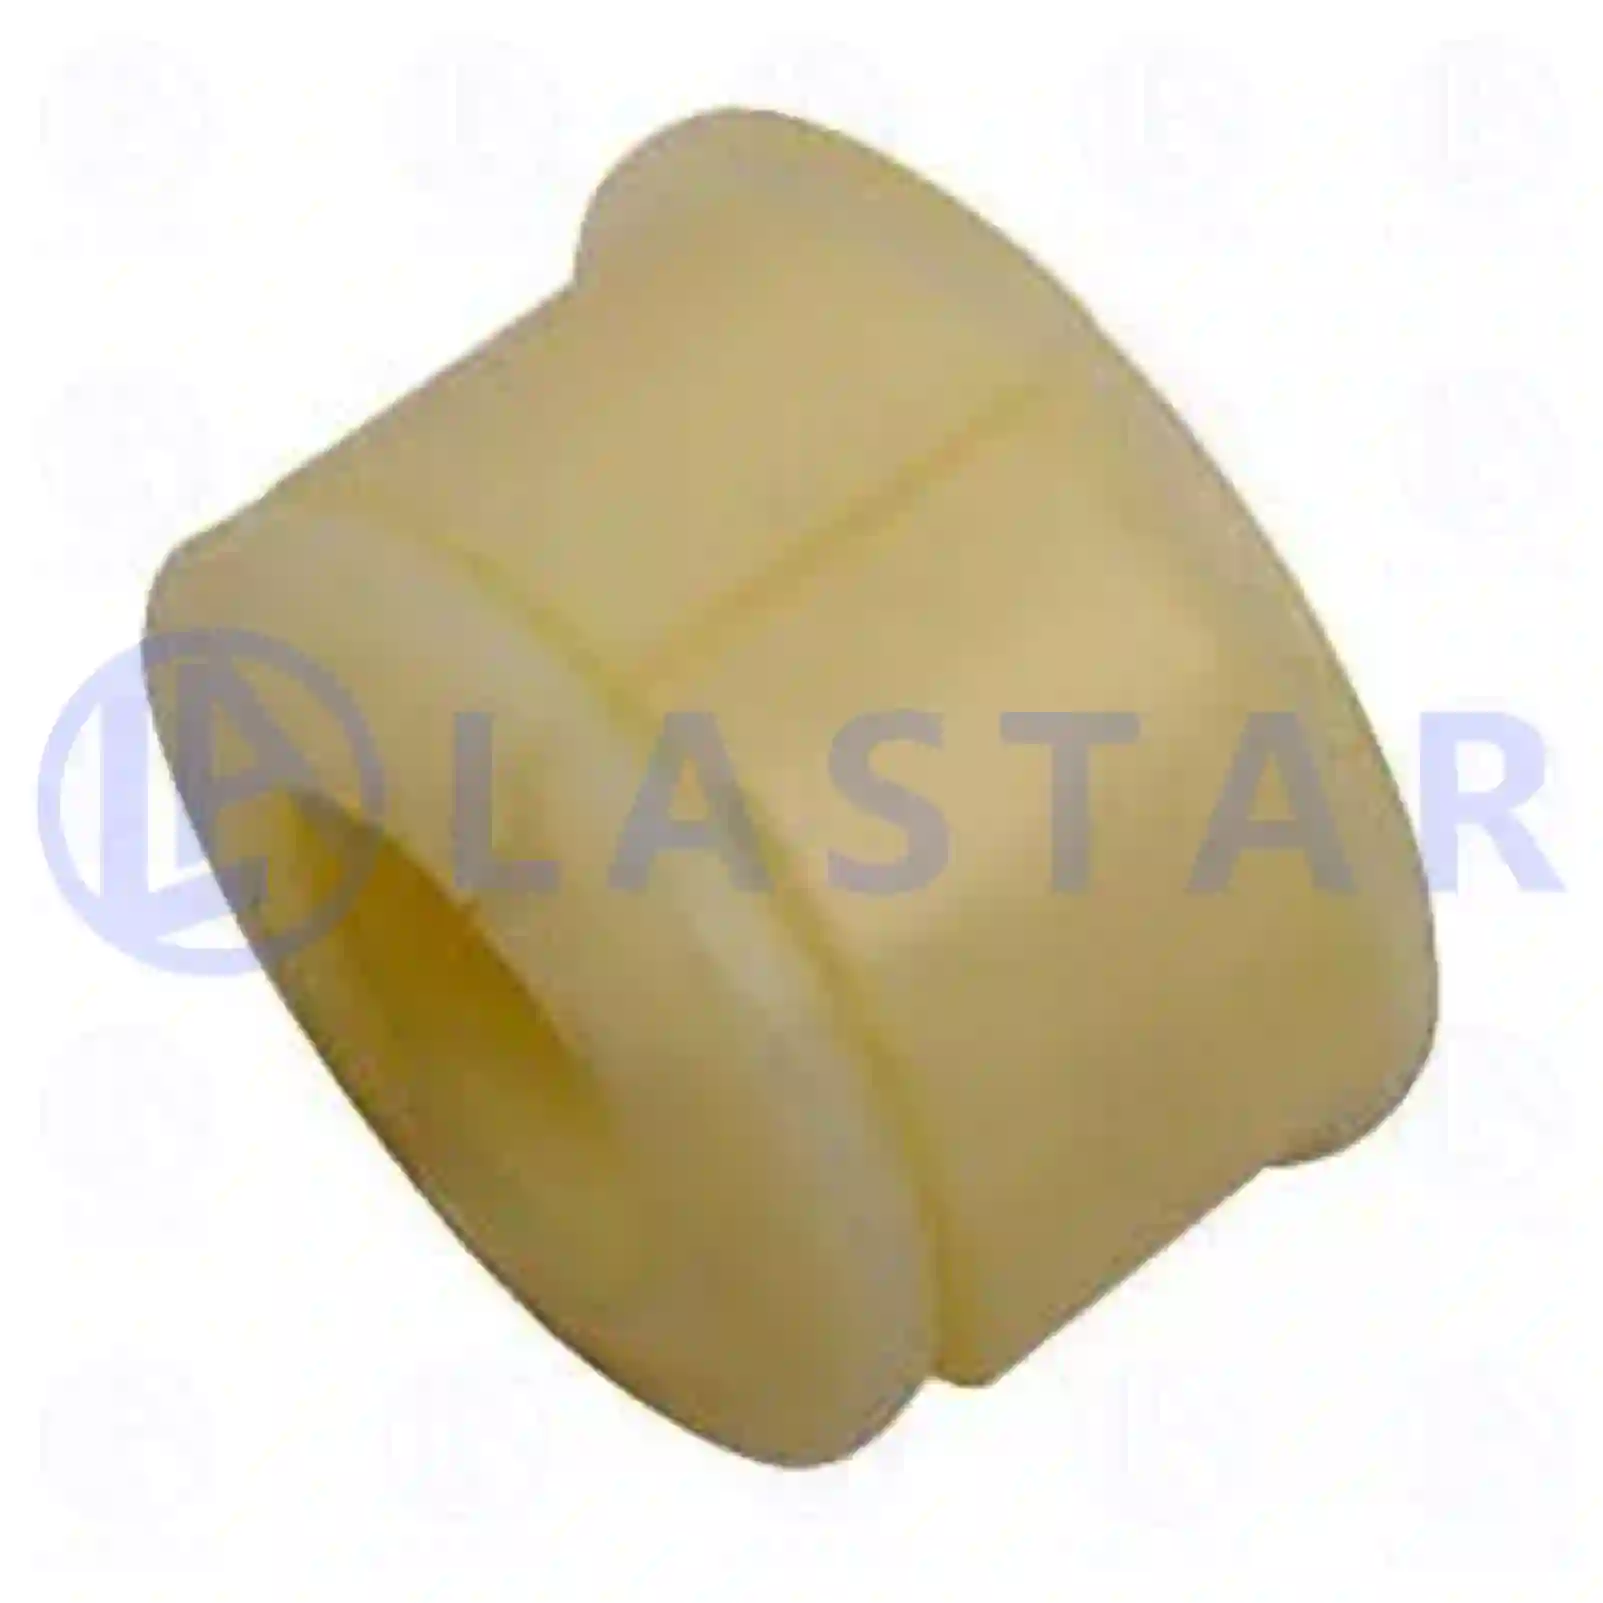 Bushing, stabilizer, 77728144, 3873260181, 6203200828, , ||  77728144 Lastar Spare Part | Truck Spare Parts, Auotomotive Spare Parts Bushing, stabilizer, 77728144, 3873260181, 6203200828, , ||  77728144 Lastar Spare Part | Truck Spare Parts, Auotomotive Spare Parts